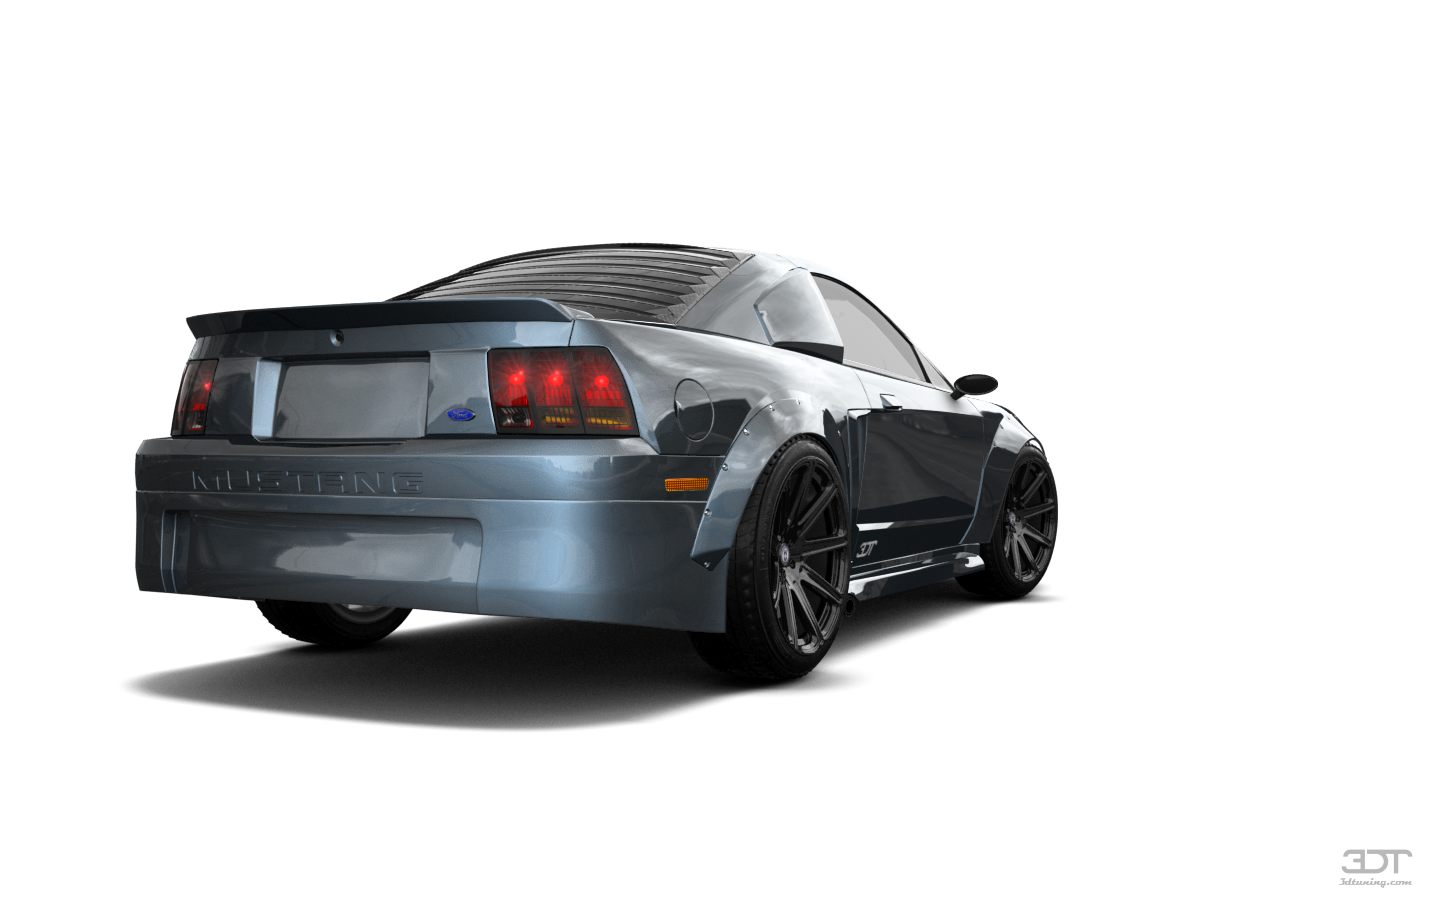 Ford Mustang 2 Door Coupe 2000 tuning